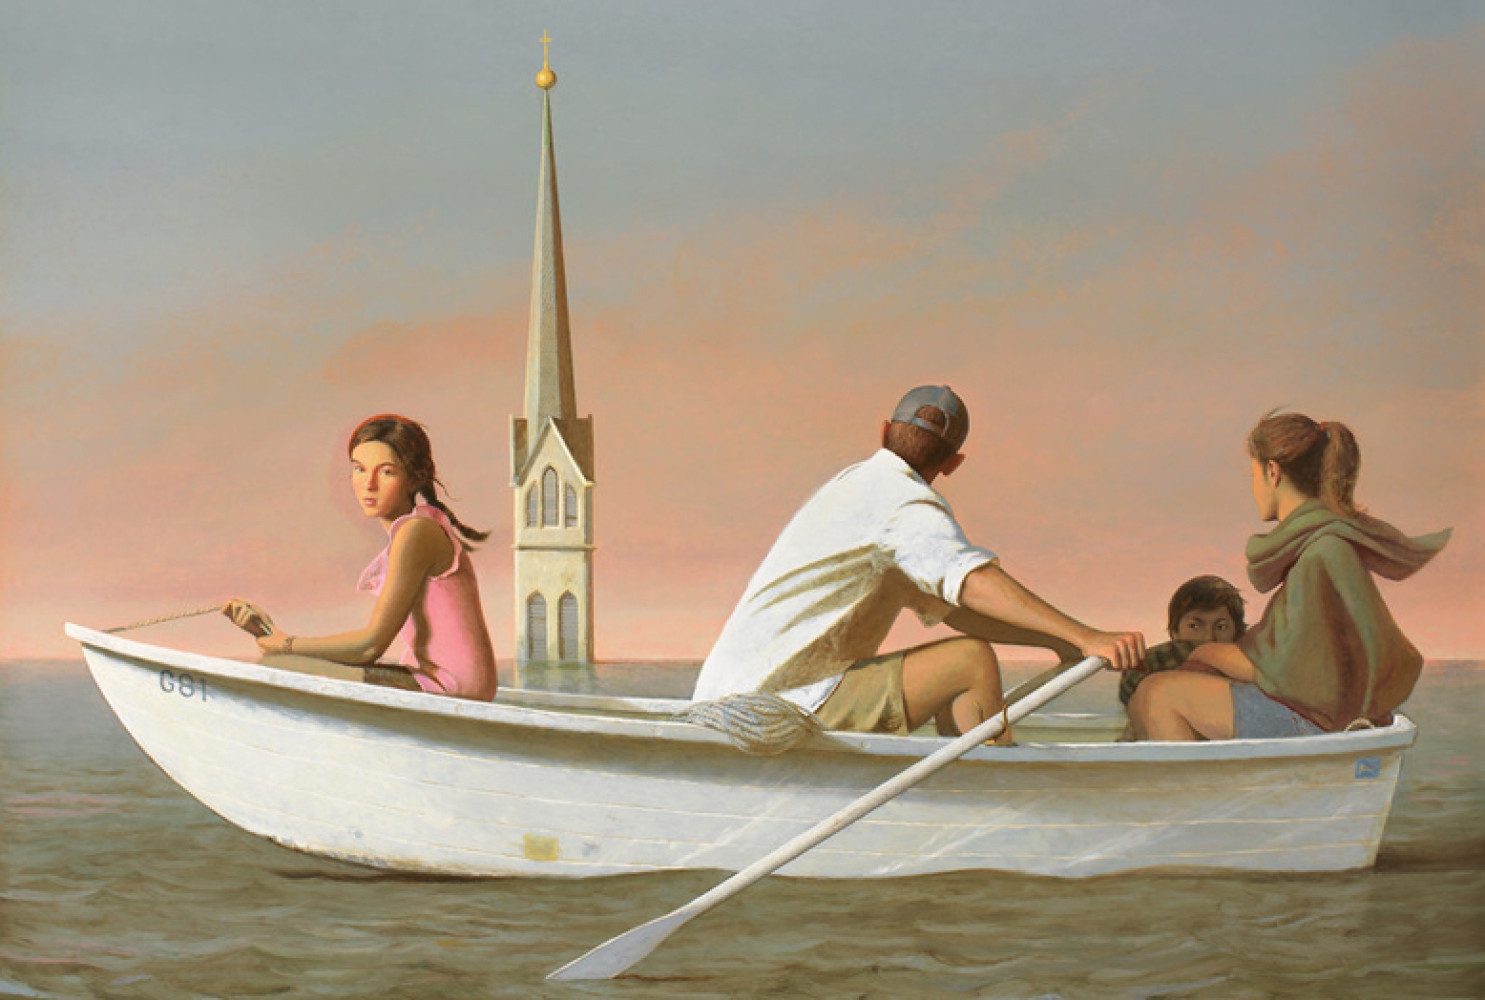 The Flood , 2018, by Bo Bartlett (American, b. 1955). Oil on linen, 82 x 100 inches. ©Image courtesy of the artist and Miles McEnery Gallery, New York, NY.